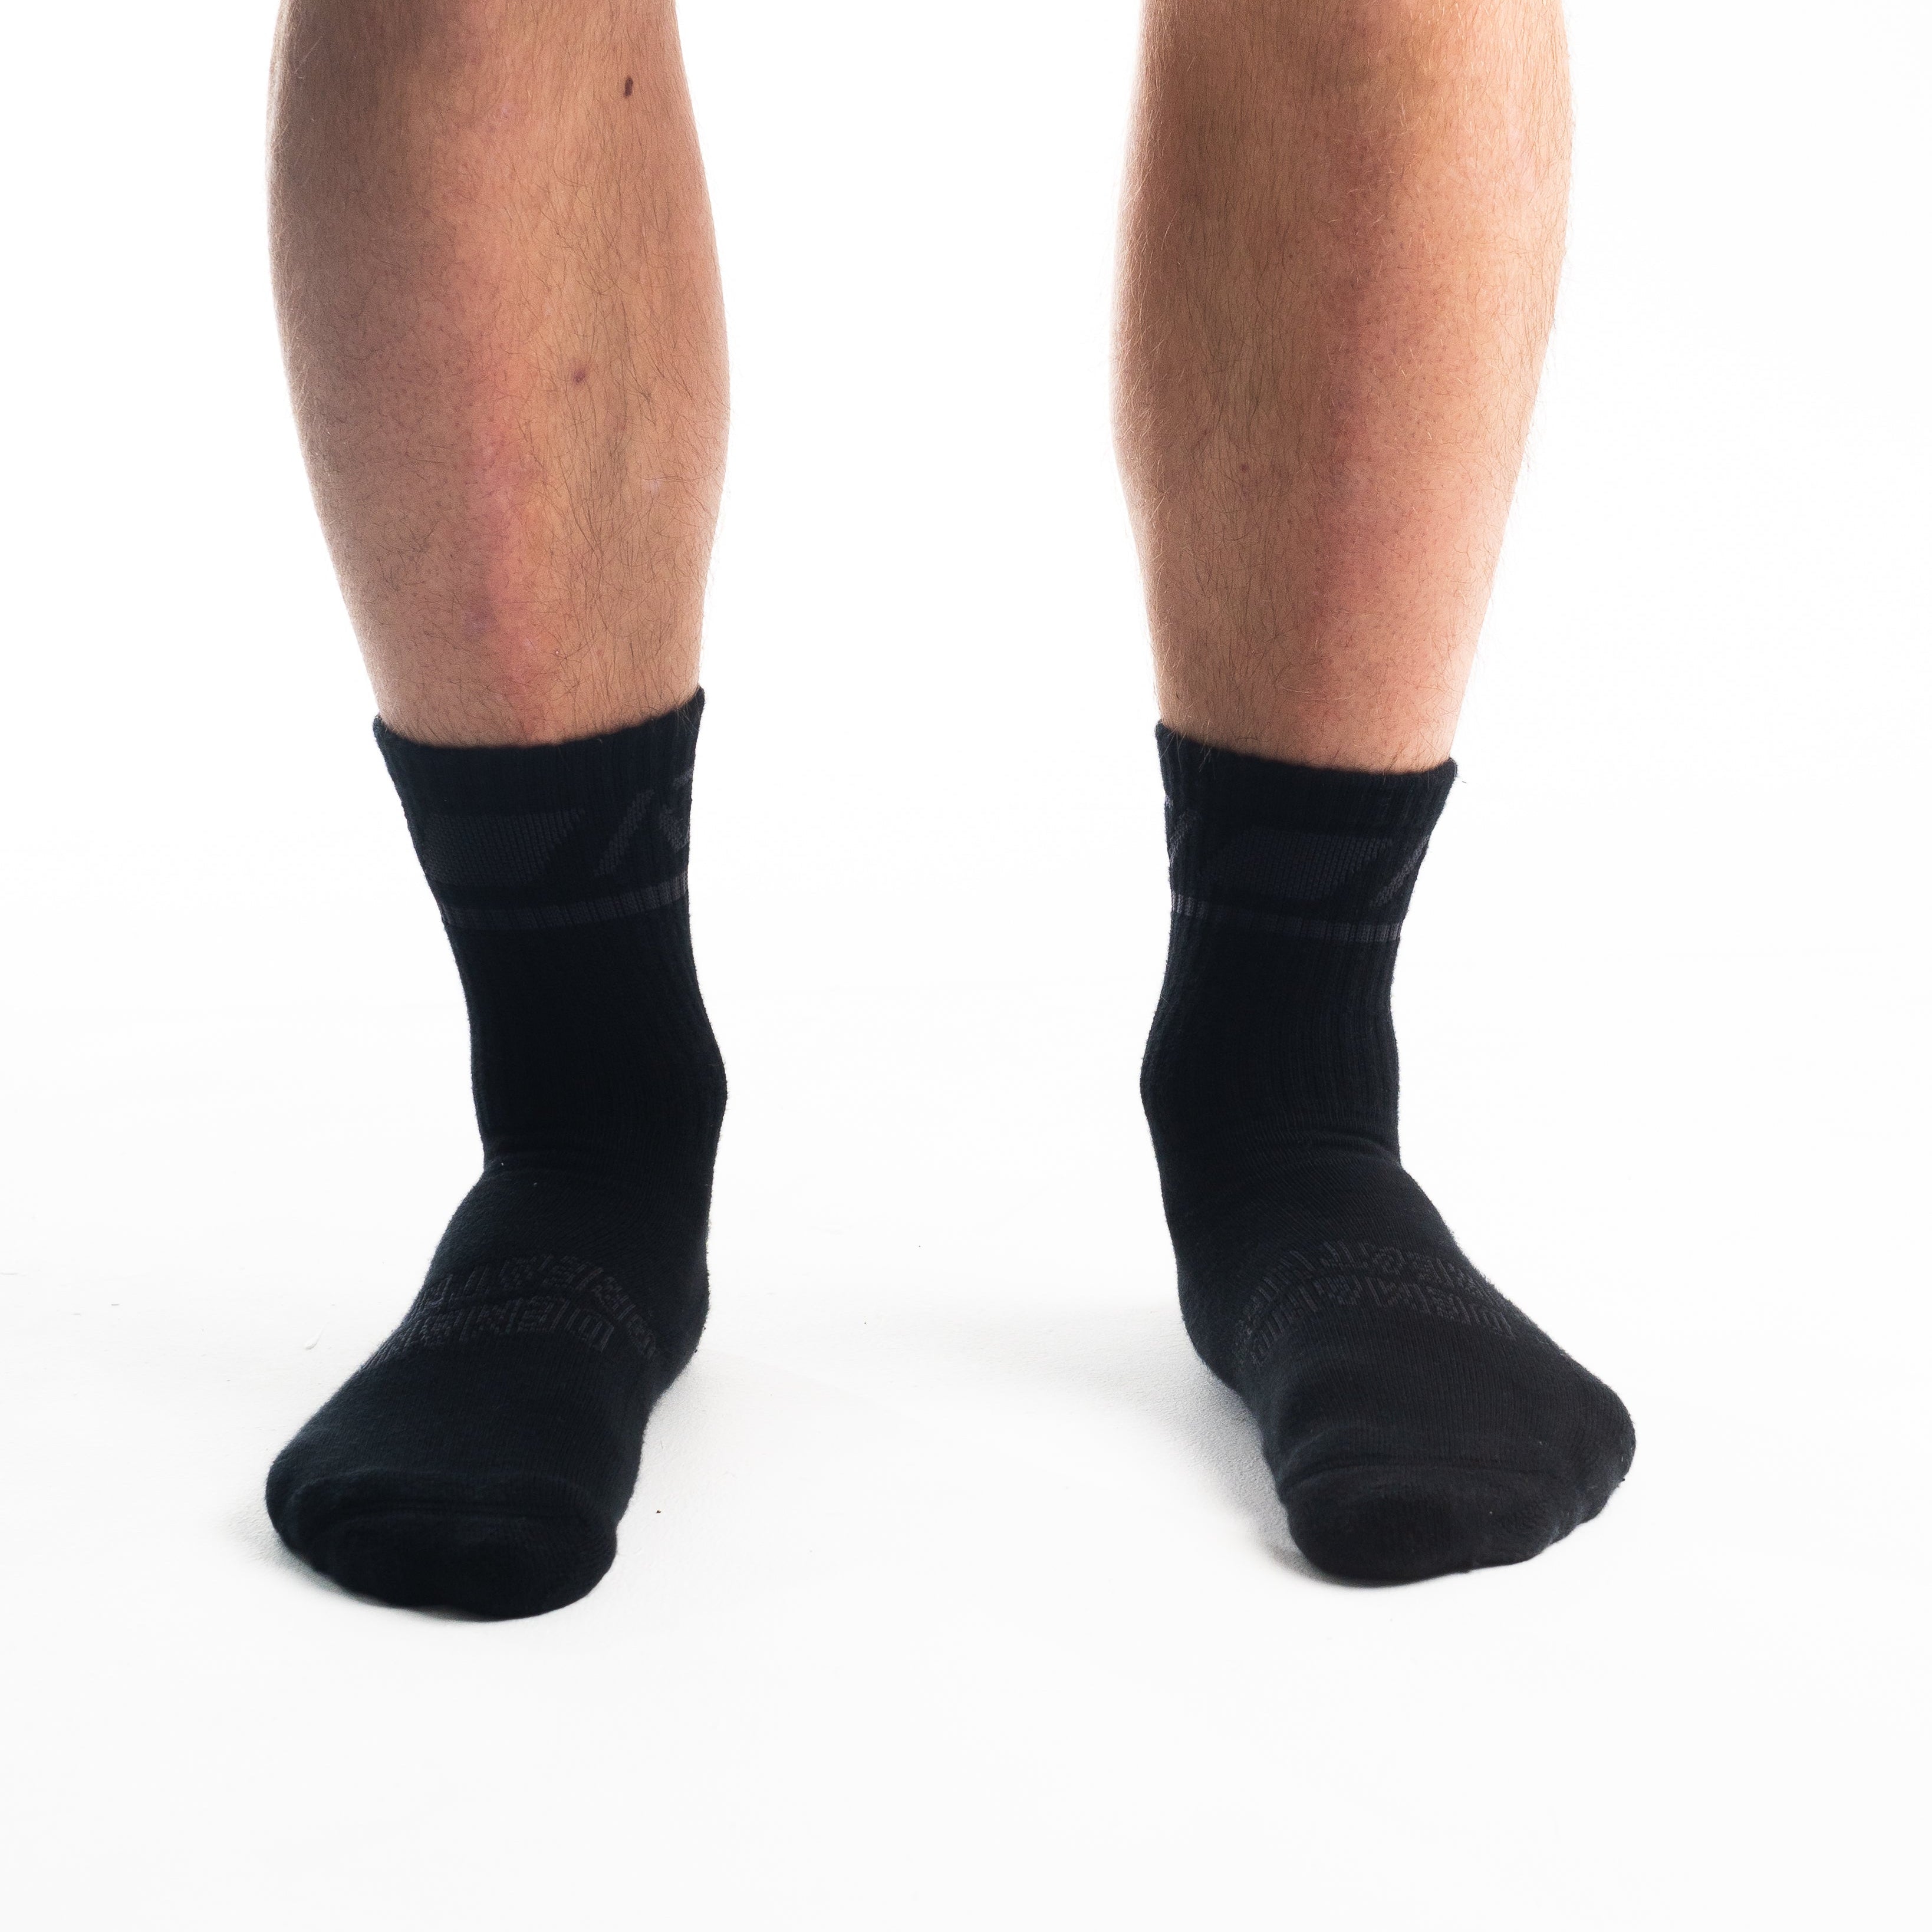 A7 Stealth Crew socks showcase gold logos and let your energy show on the platform, in your training or while out and about. The IPF Approved Stealth Meet Kit includes Powerlifting Singlet, A7 Meet Shirt, A7 Zebra Wrist Wraps, A7 Deadlift Socks, Hourglass Knee Sleeves (Stiff Knee Sleeves and Rigor Mortis Knee Sleeves). All A7 Powerlifting Equipment shipping to UK, Norway, Switzerland and Iceland.